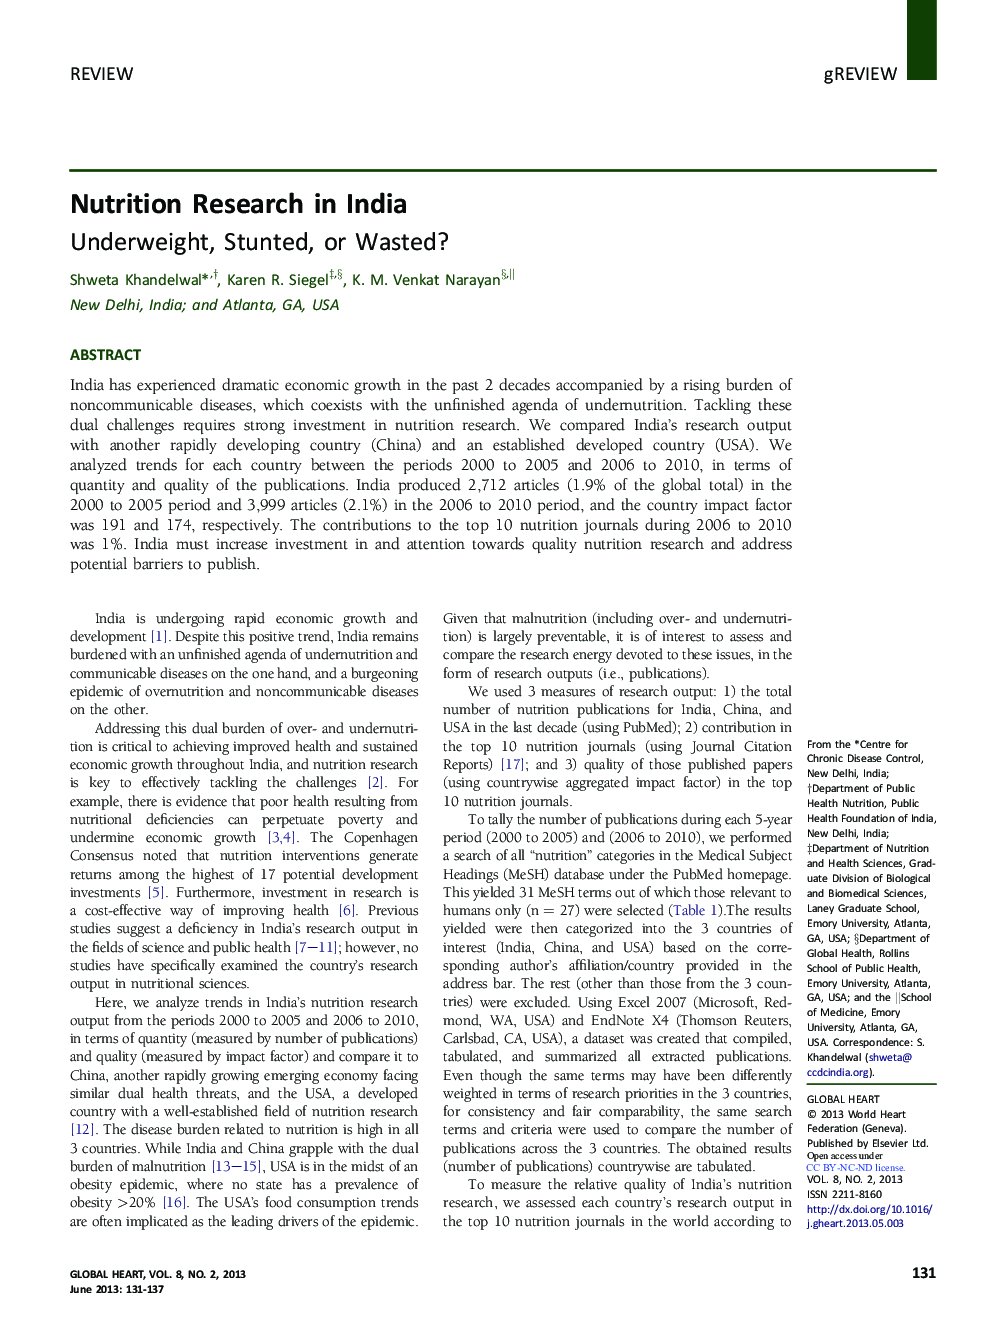 Nutrition Research in India: Underweight, Stunted, or Wasted?